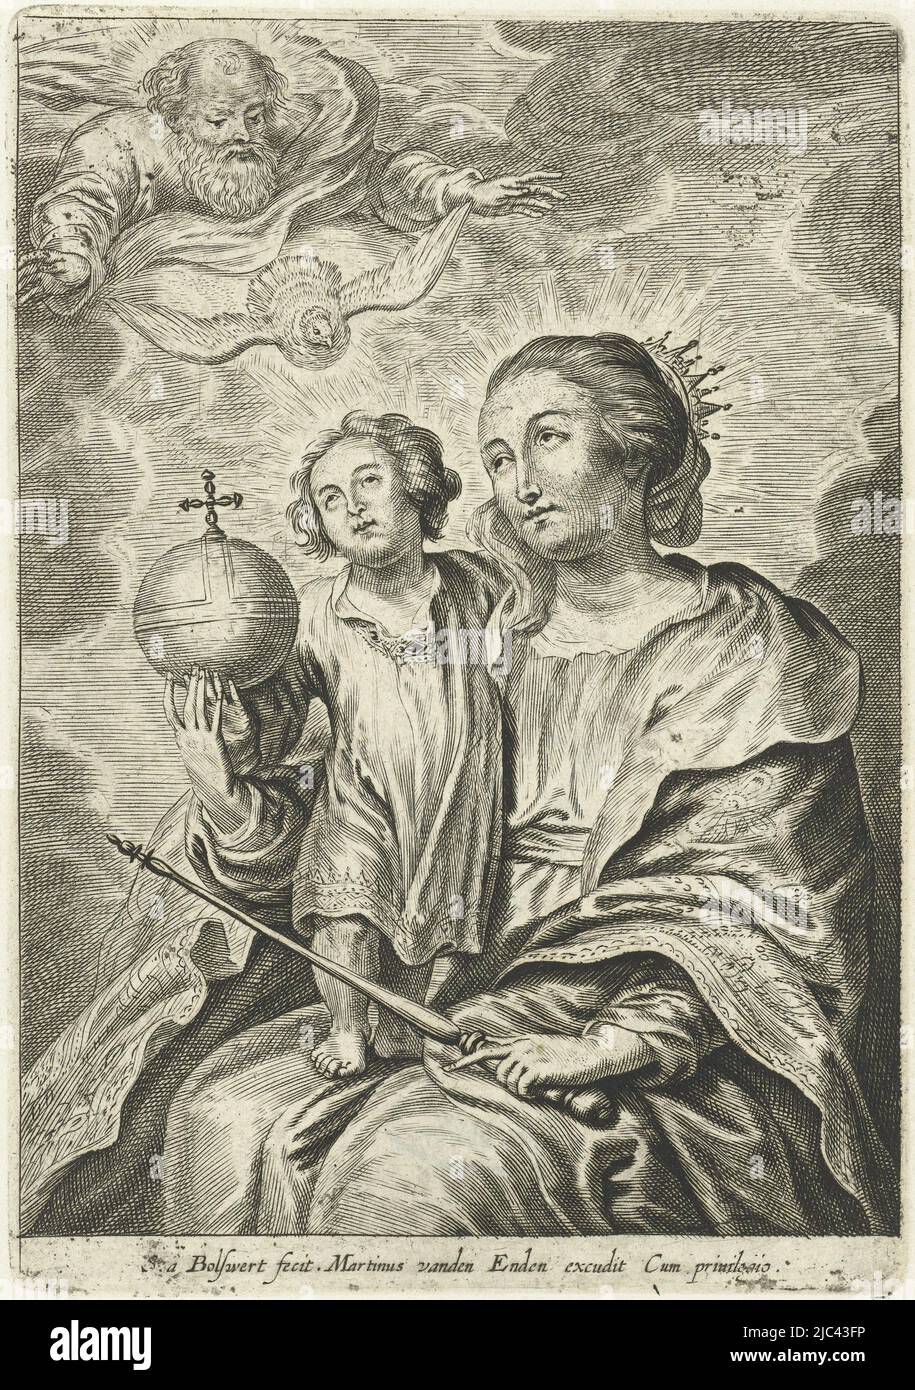 Crowned Mary seated with the Christ child on her lap, Christ holding a globe or empire apple and Mary holding a scepter. Both look to God the Father and the dove as symbols of the Holy Spirit appearing in heaven above them., Mary with Christ Child, God the Father and Holy Spirit V, print maker: Schelte Adamsz. Bolswert, (mentioned on object), Peter Paul Rubens, publisher: Martinus van den Enden, (mentioned on object), 1596 - 1659, paper, engraving, h 127 mm × w 89 mm Stock Photo